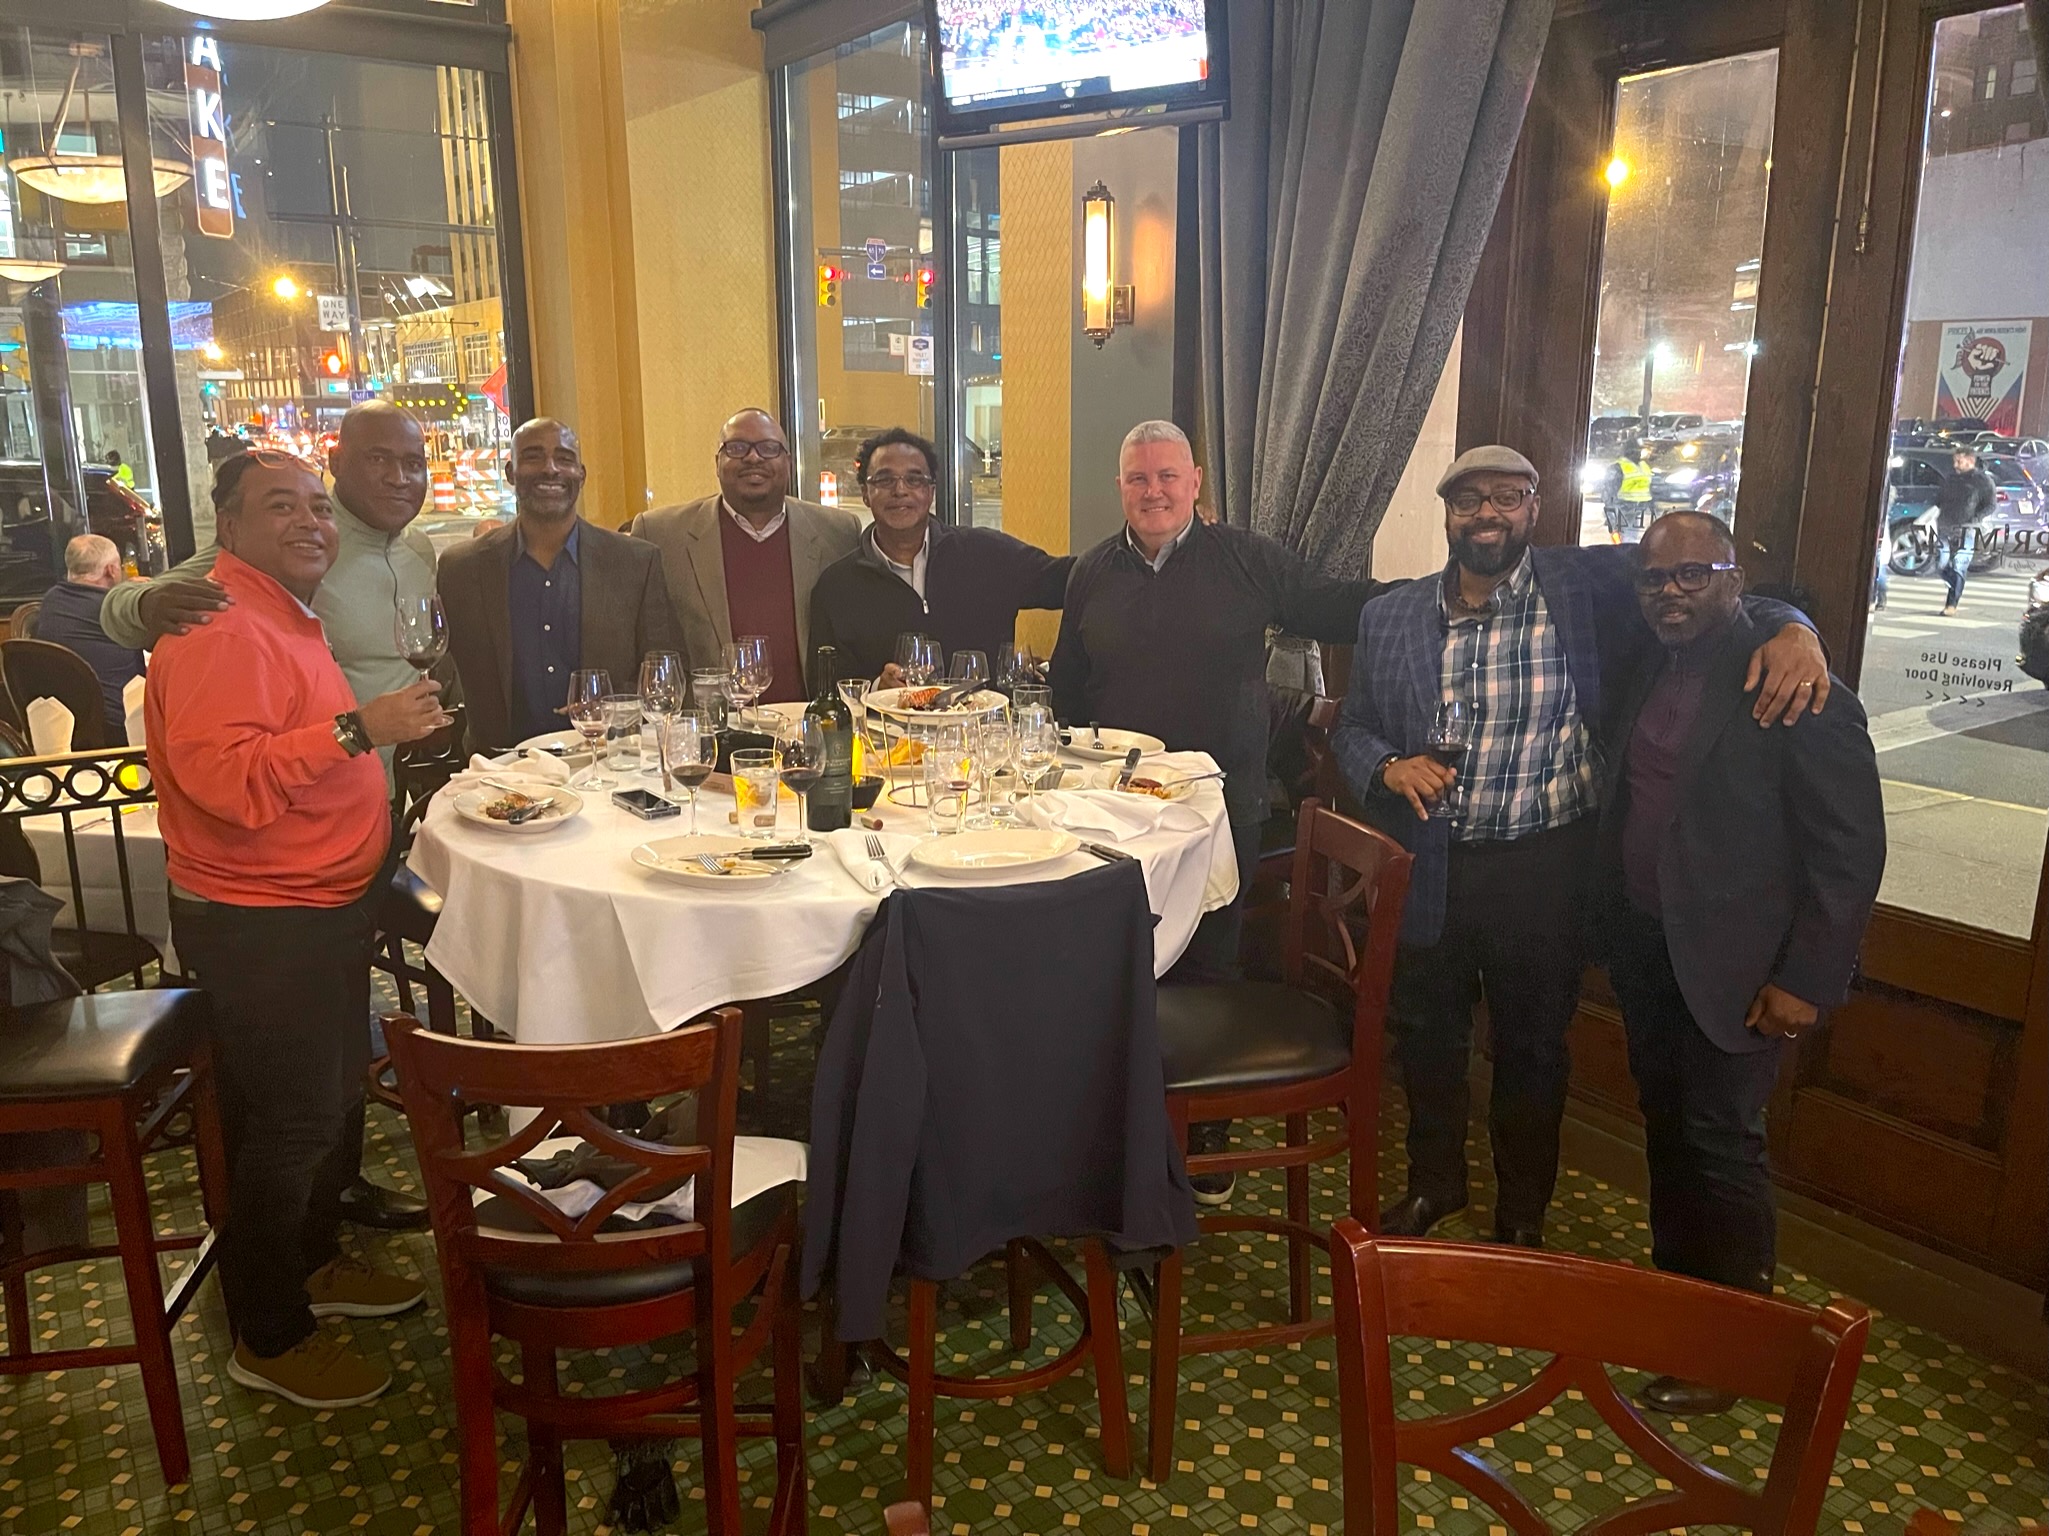 Munawar Ali (from left), Steve Garrett, Brian Henry, Dr. James Blackwell, Walter Blake, Clint Gassaway, Terrence Butler, Alonzo Weems enjoy a dinner together in Indianapolis. 